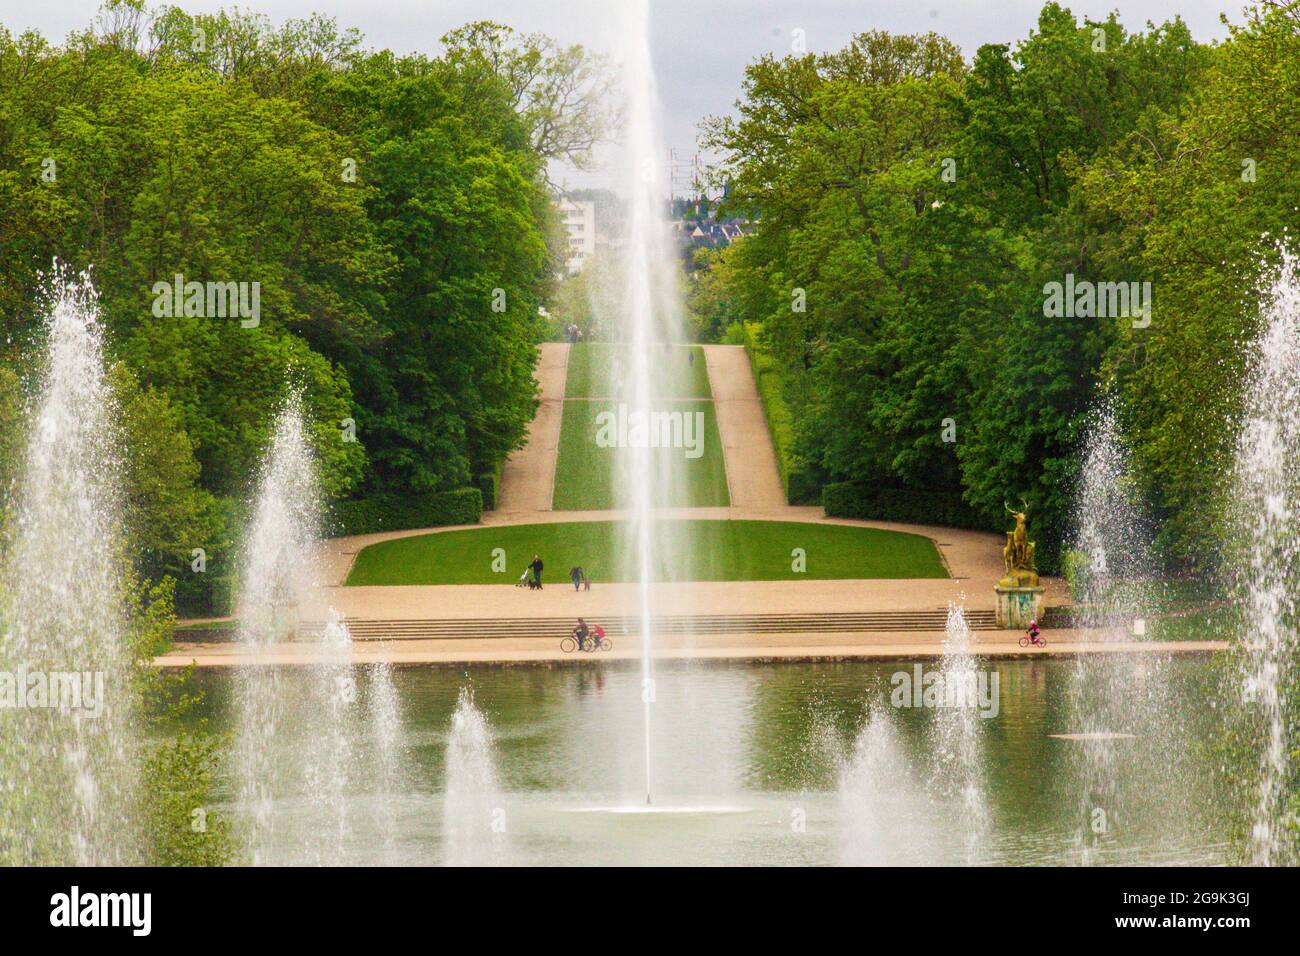 Fountains and water ways in the historic gardens at Sceaux, France Stock Photo